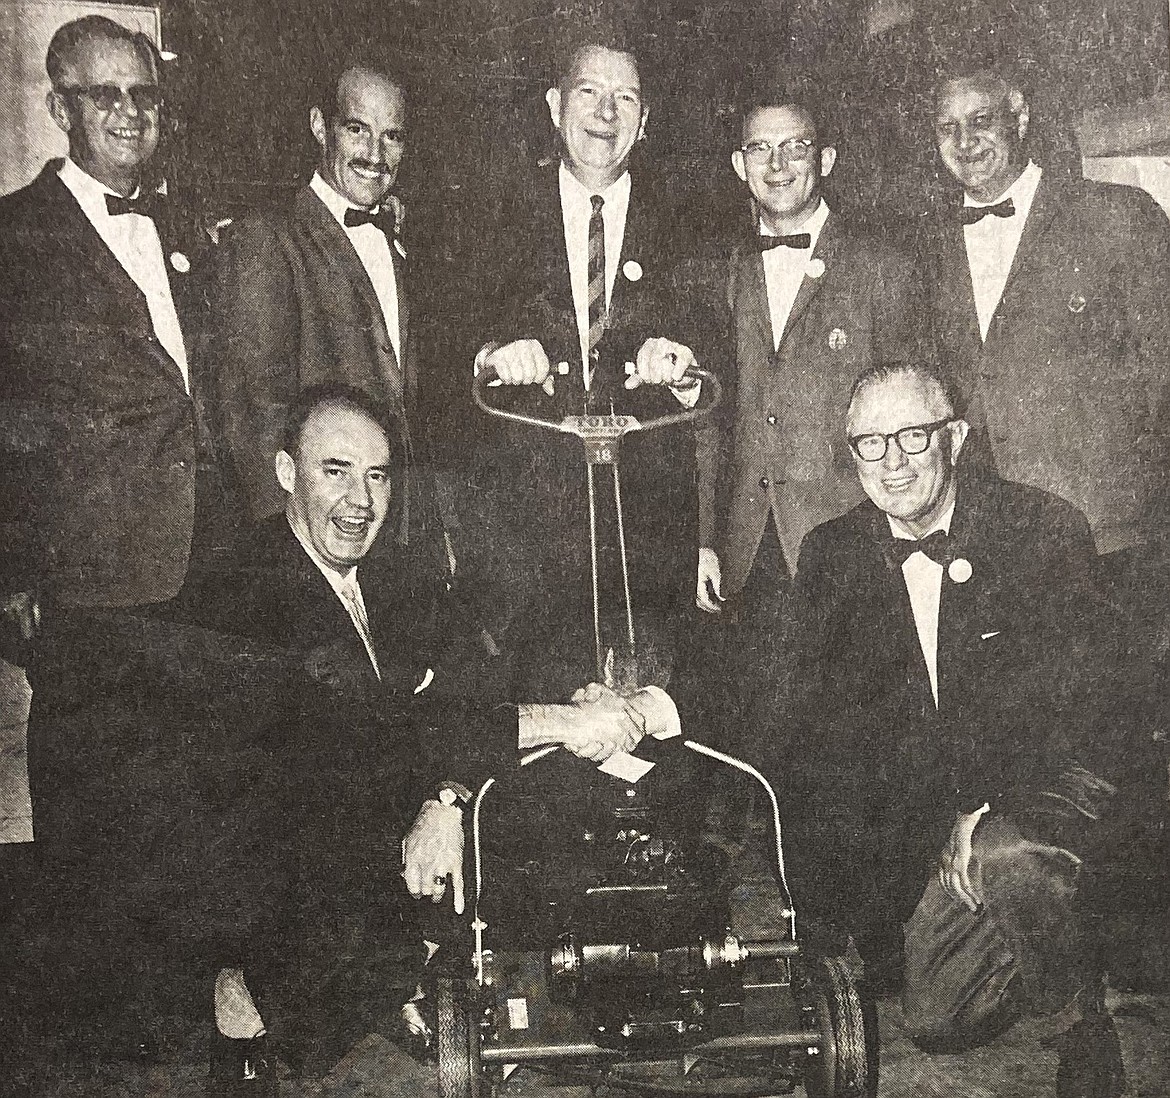 Members of the Athletic Round Table were key to the success of the hydroplane races (1958-68). They sponsored a fundraiser for the races Nov. 18, 1963. Commodore Carter Crimp, front left, is shown congratulating Clive Roberts of Hayden Lake, who won a power mower, one of the evening’s prizes. Knights of the Round Table in the back are, from left, Art Peterson, Bob Nobis, Ron MacDonald, Glenn Durand and Vernon James.